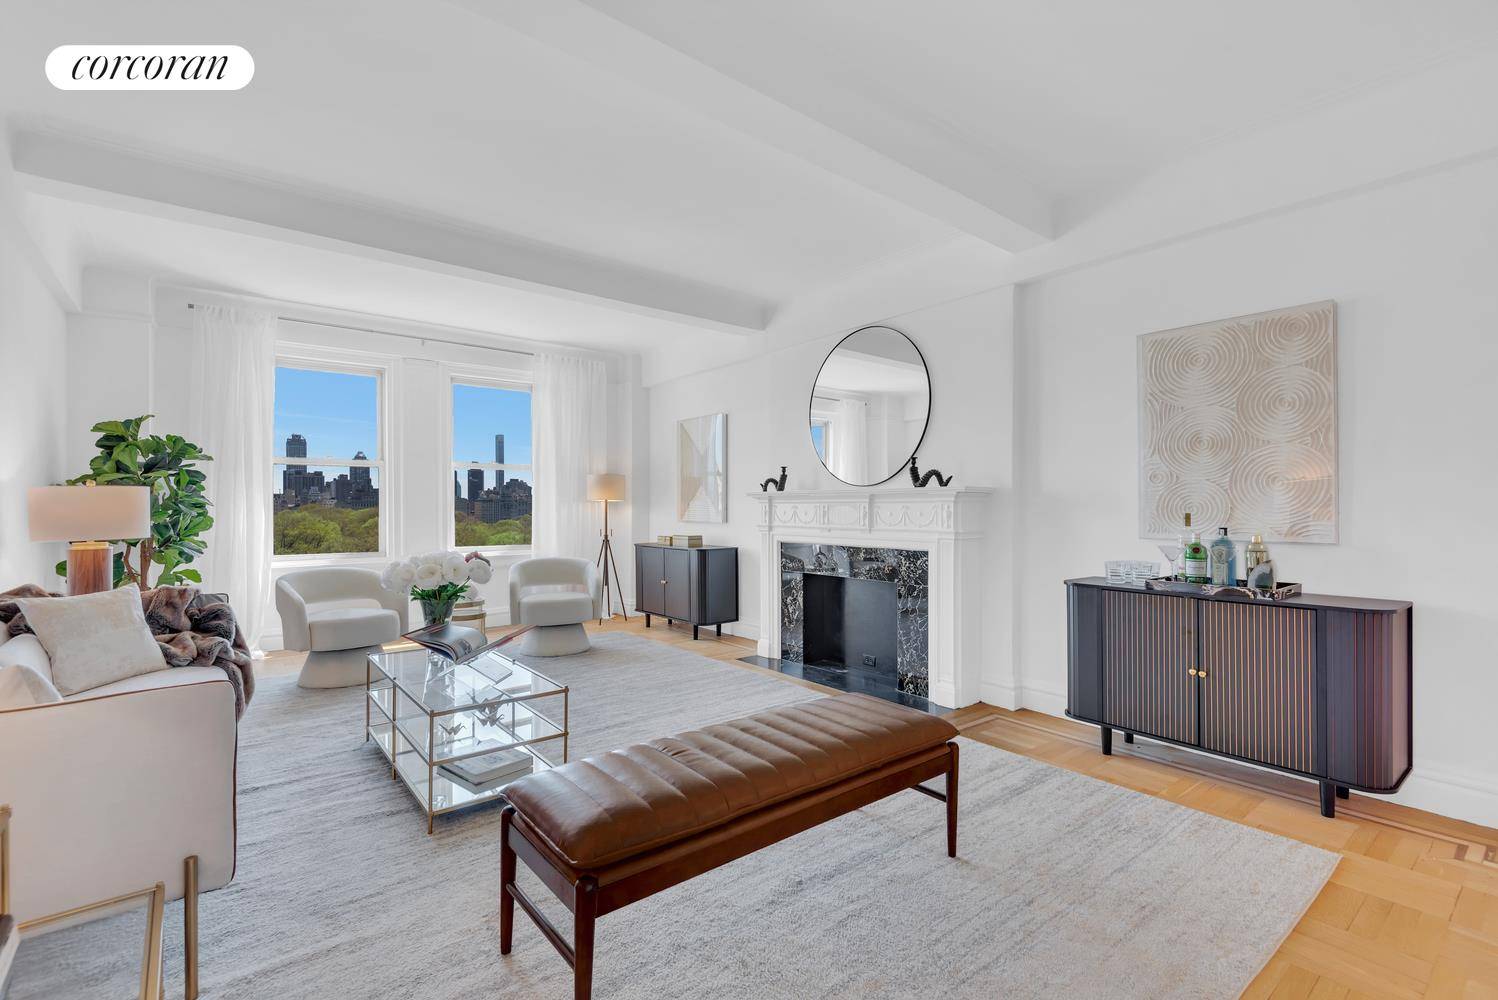 One of the most spectacular vantage points overlooking Central Park and the city skylineemanatesfromthis beautiful, high floor classic 6 room home at 65 Central Park West, one of the Avenue's ...